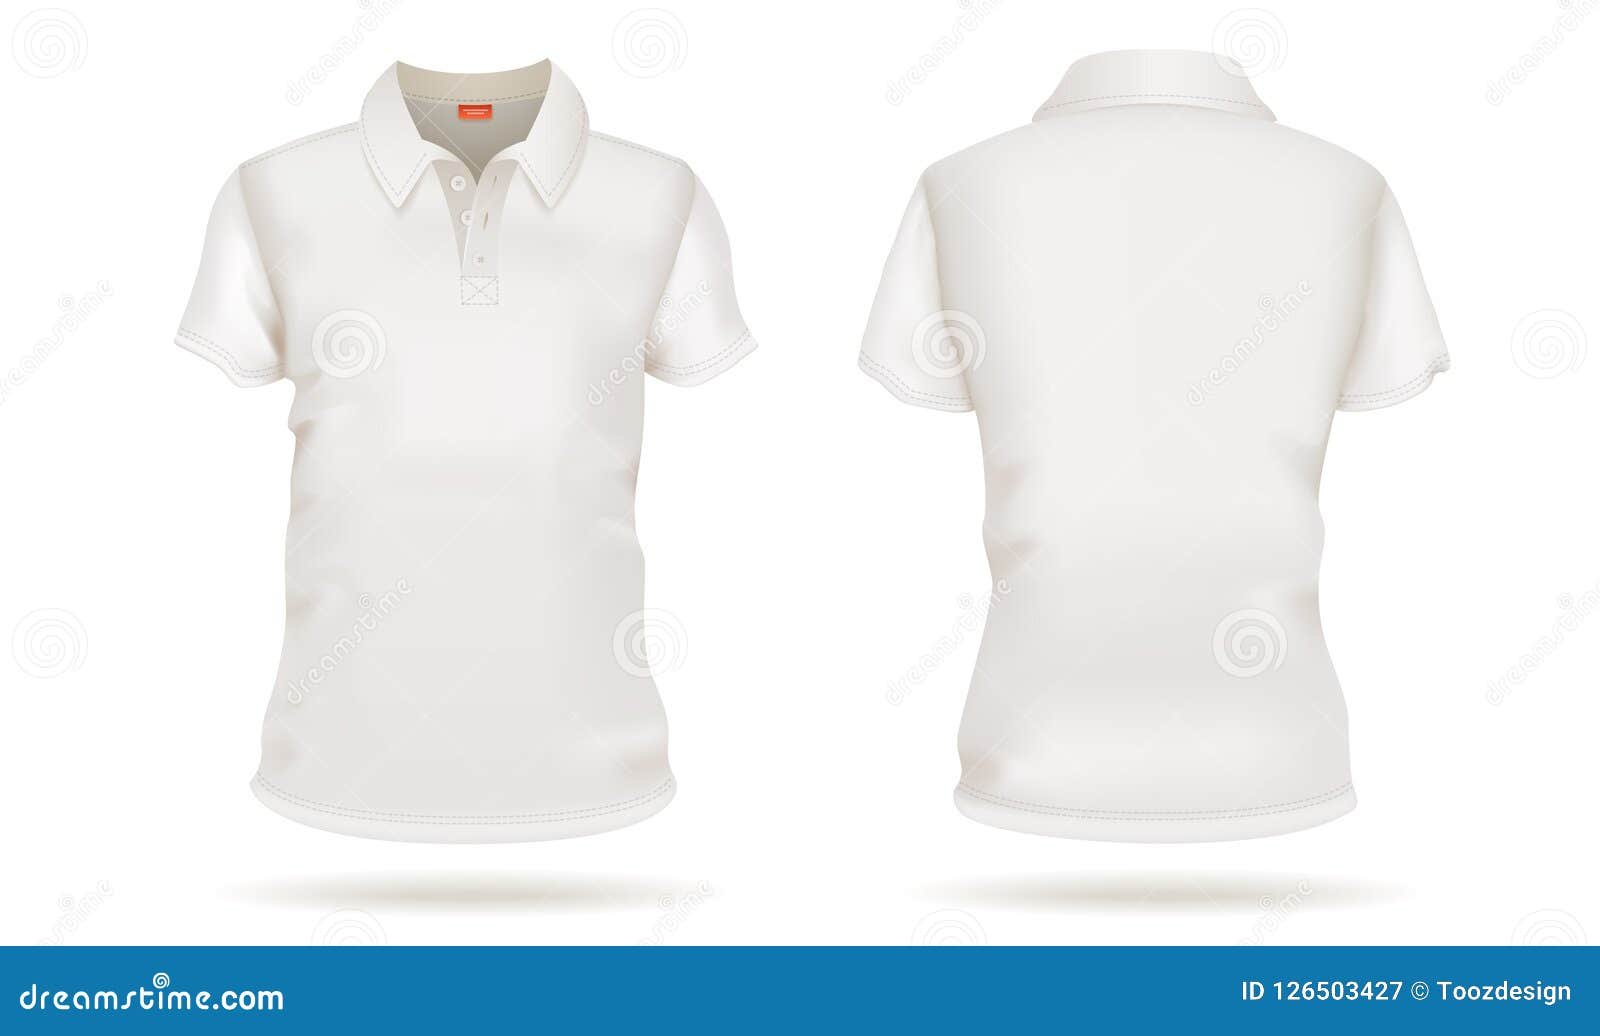 Download Template Vector White T-shirt Front And Back View White ...